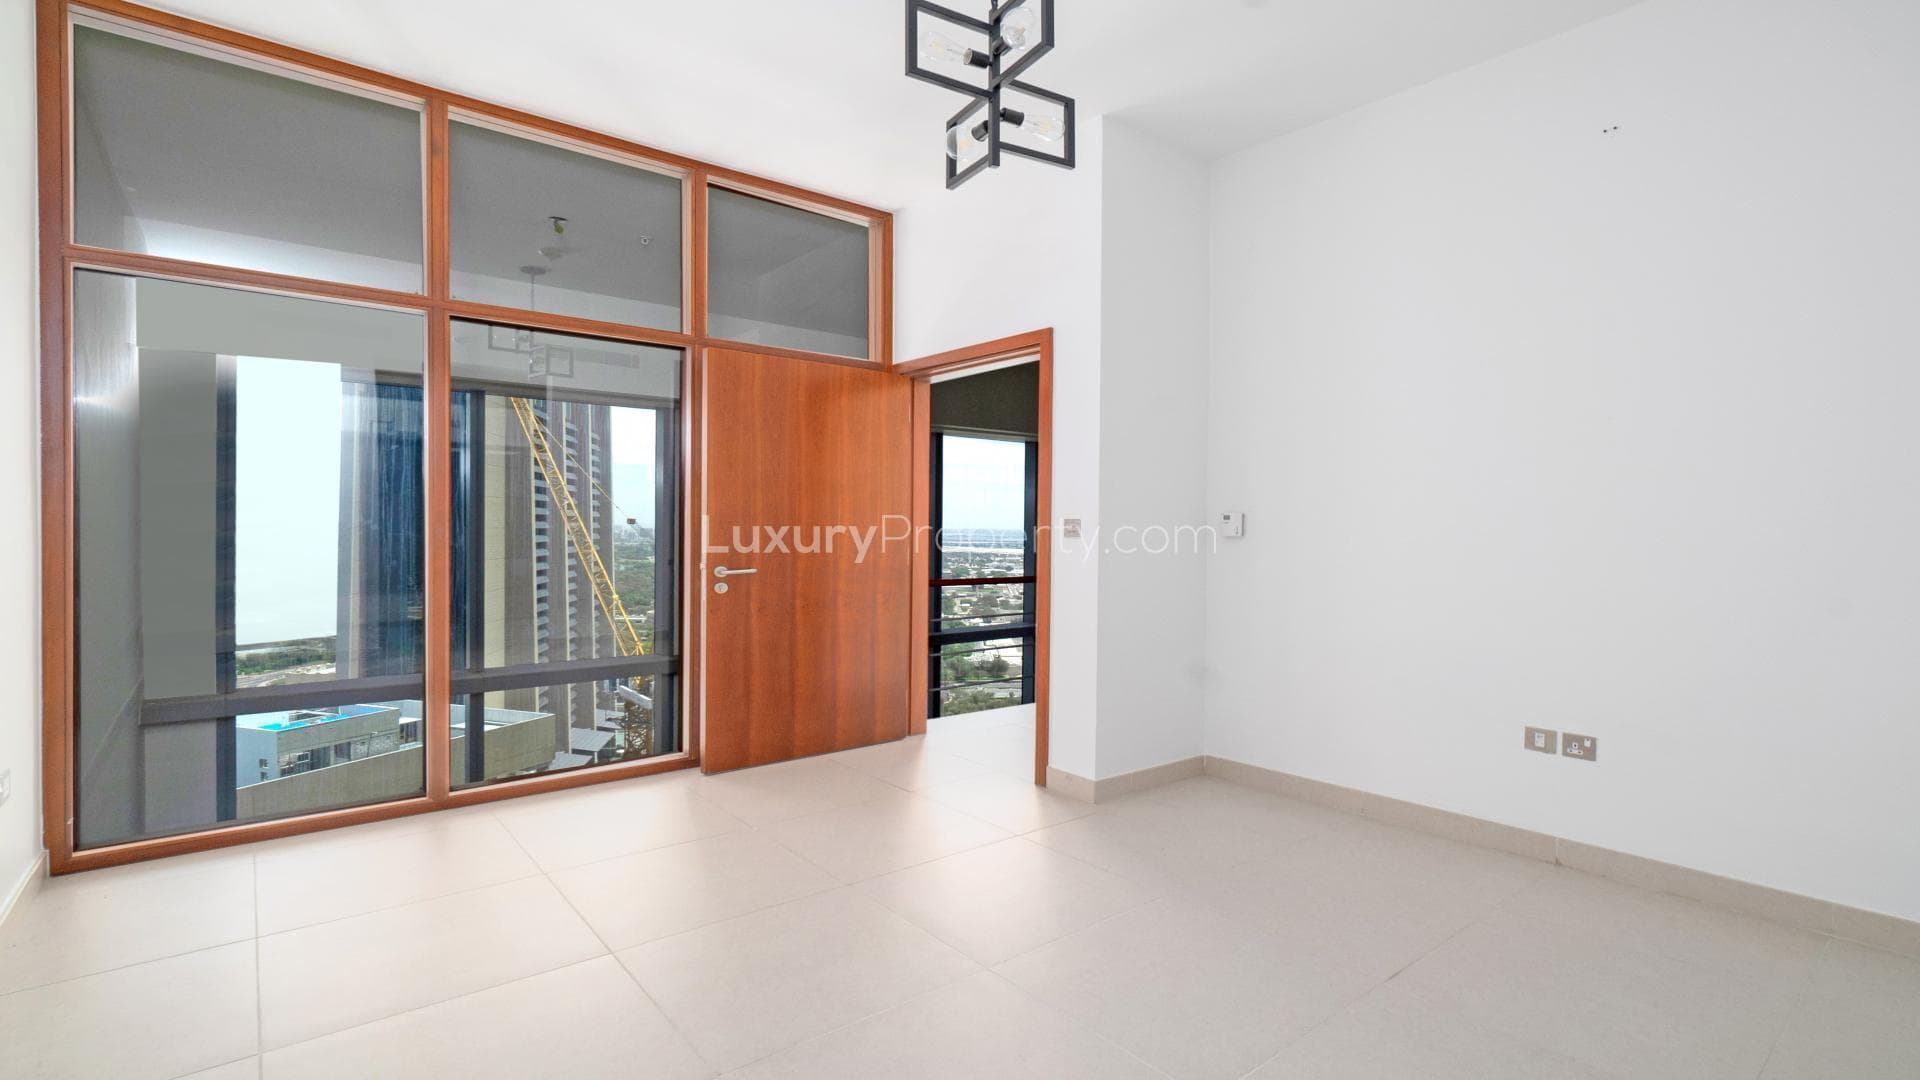 2 Bedroom Apartment For Rent Central Park Tower Lp36083 381ed1460485260.jpg